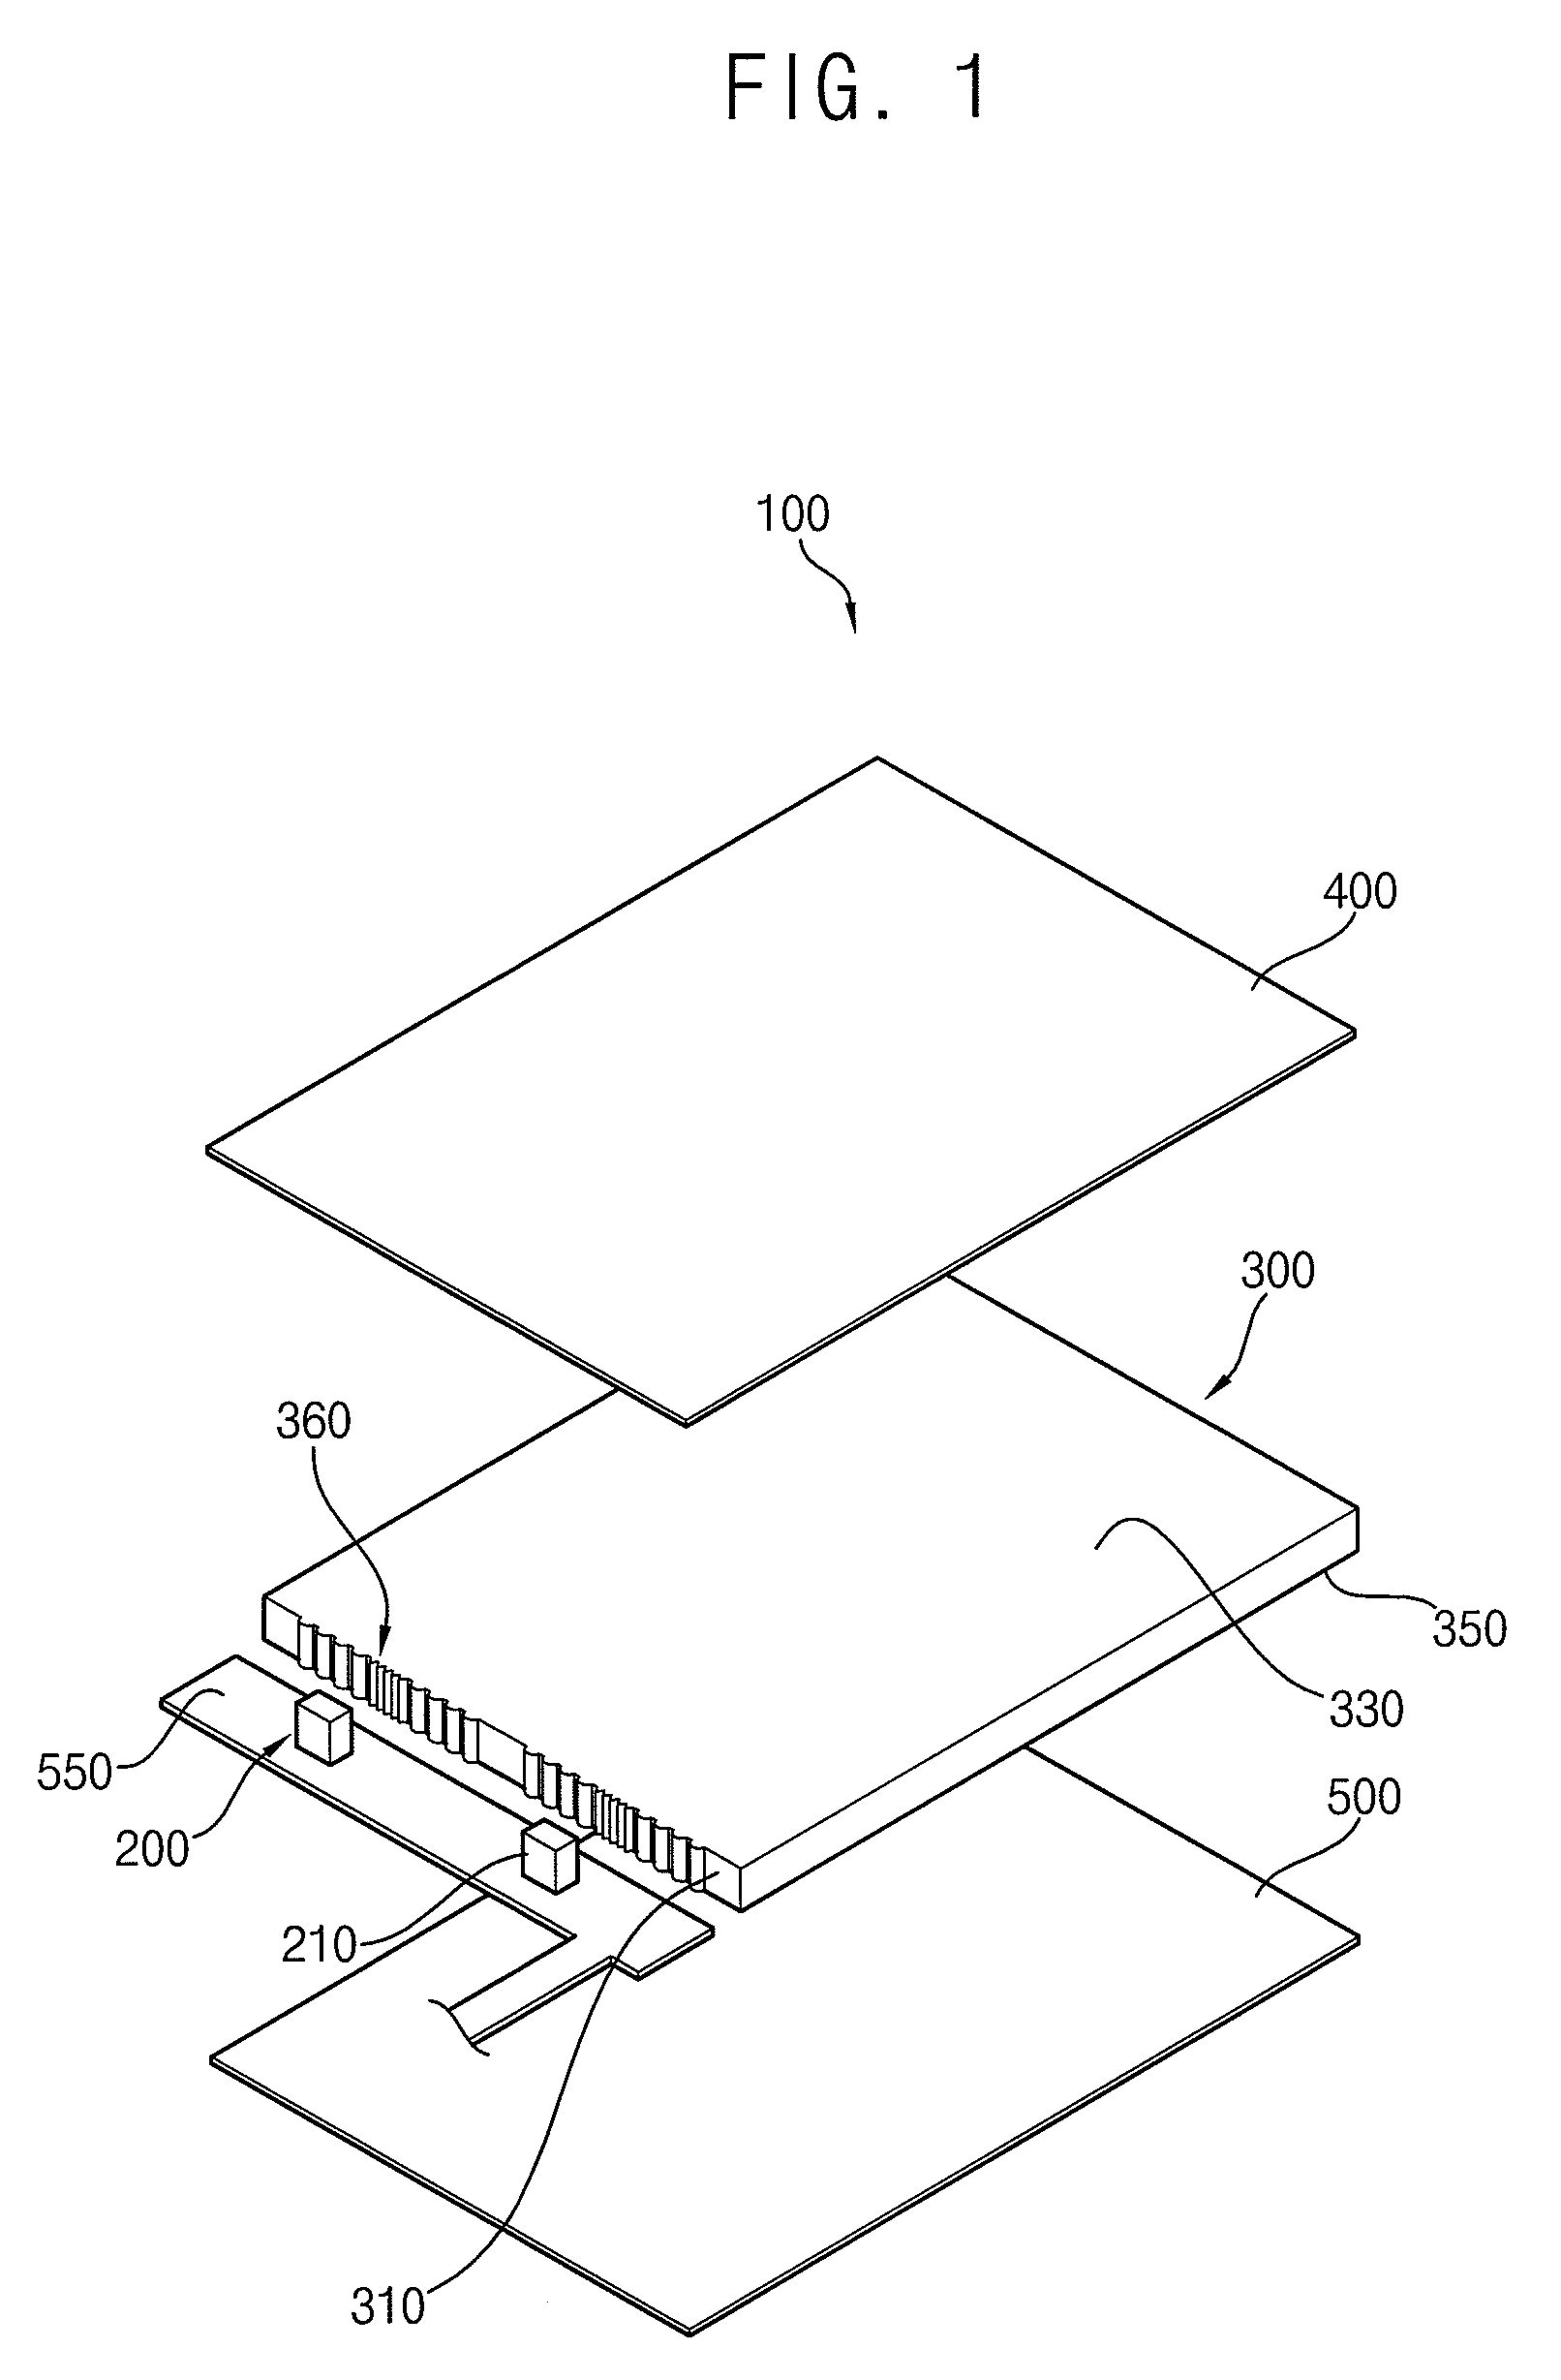 Display apparatus and backlight assembly having a light guide plate comprising first and second light control patterns